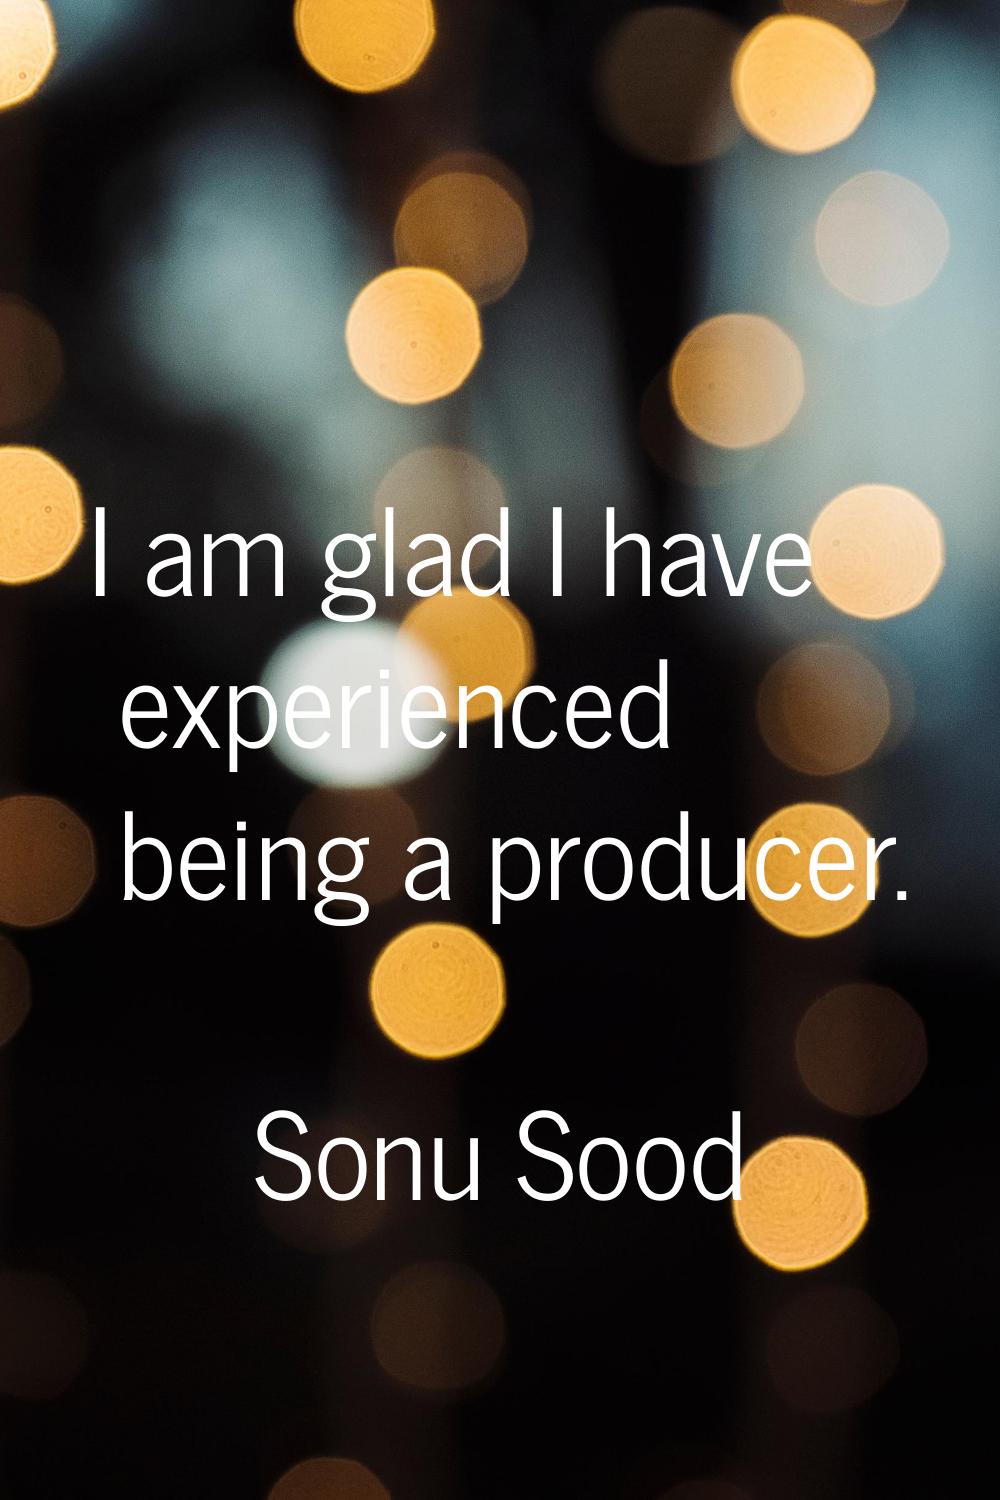 I am glad I have experienced being a producer.